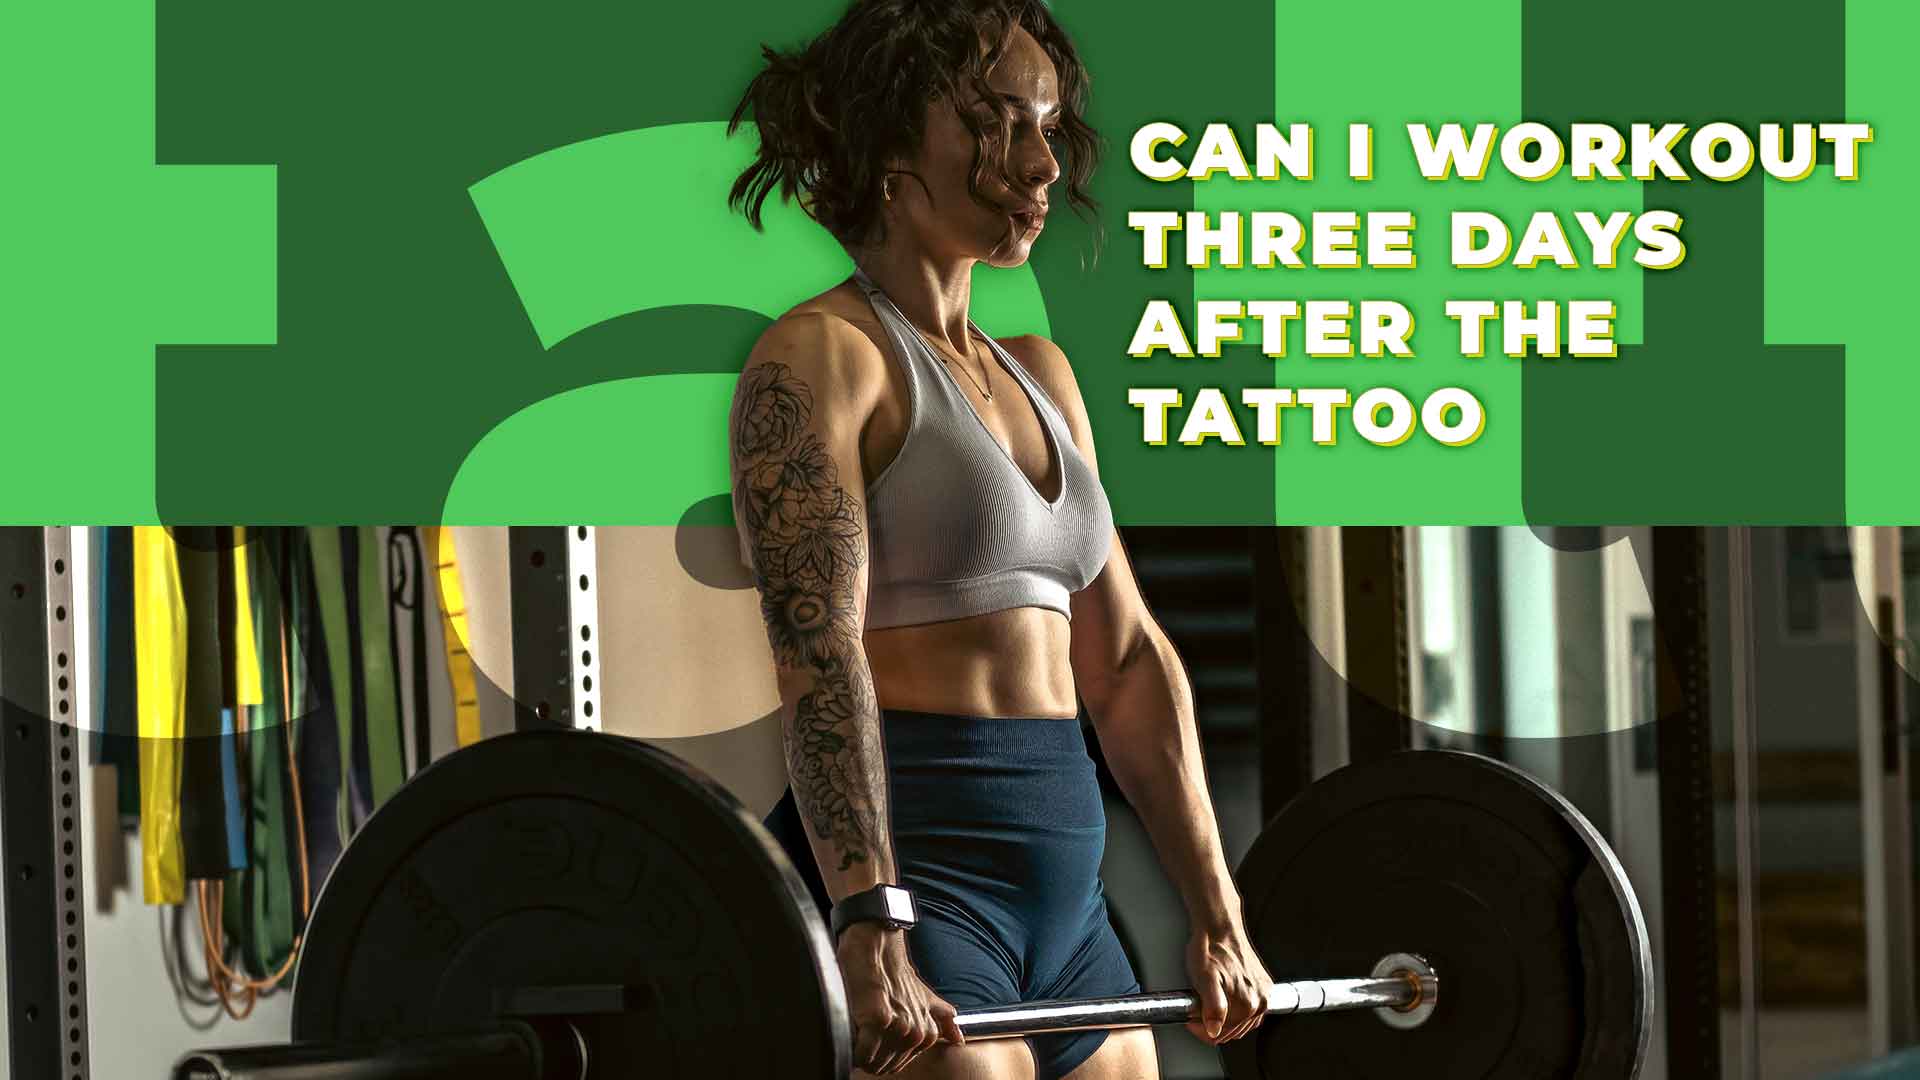 The Tattooed Athlete: How to Keep Training with a New Tattoo - Austin  Simply Fit